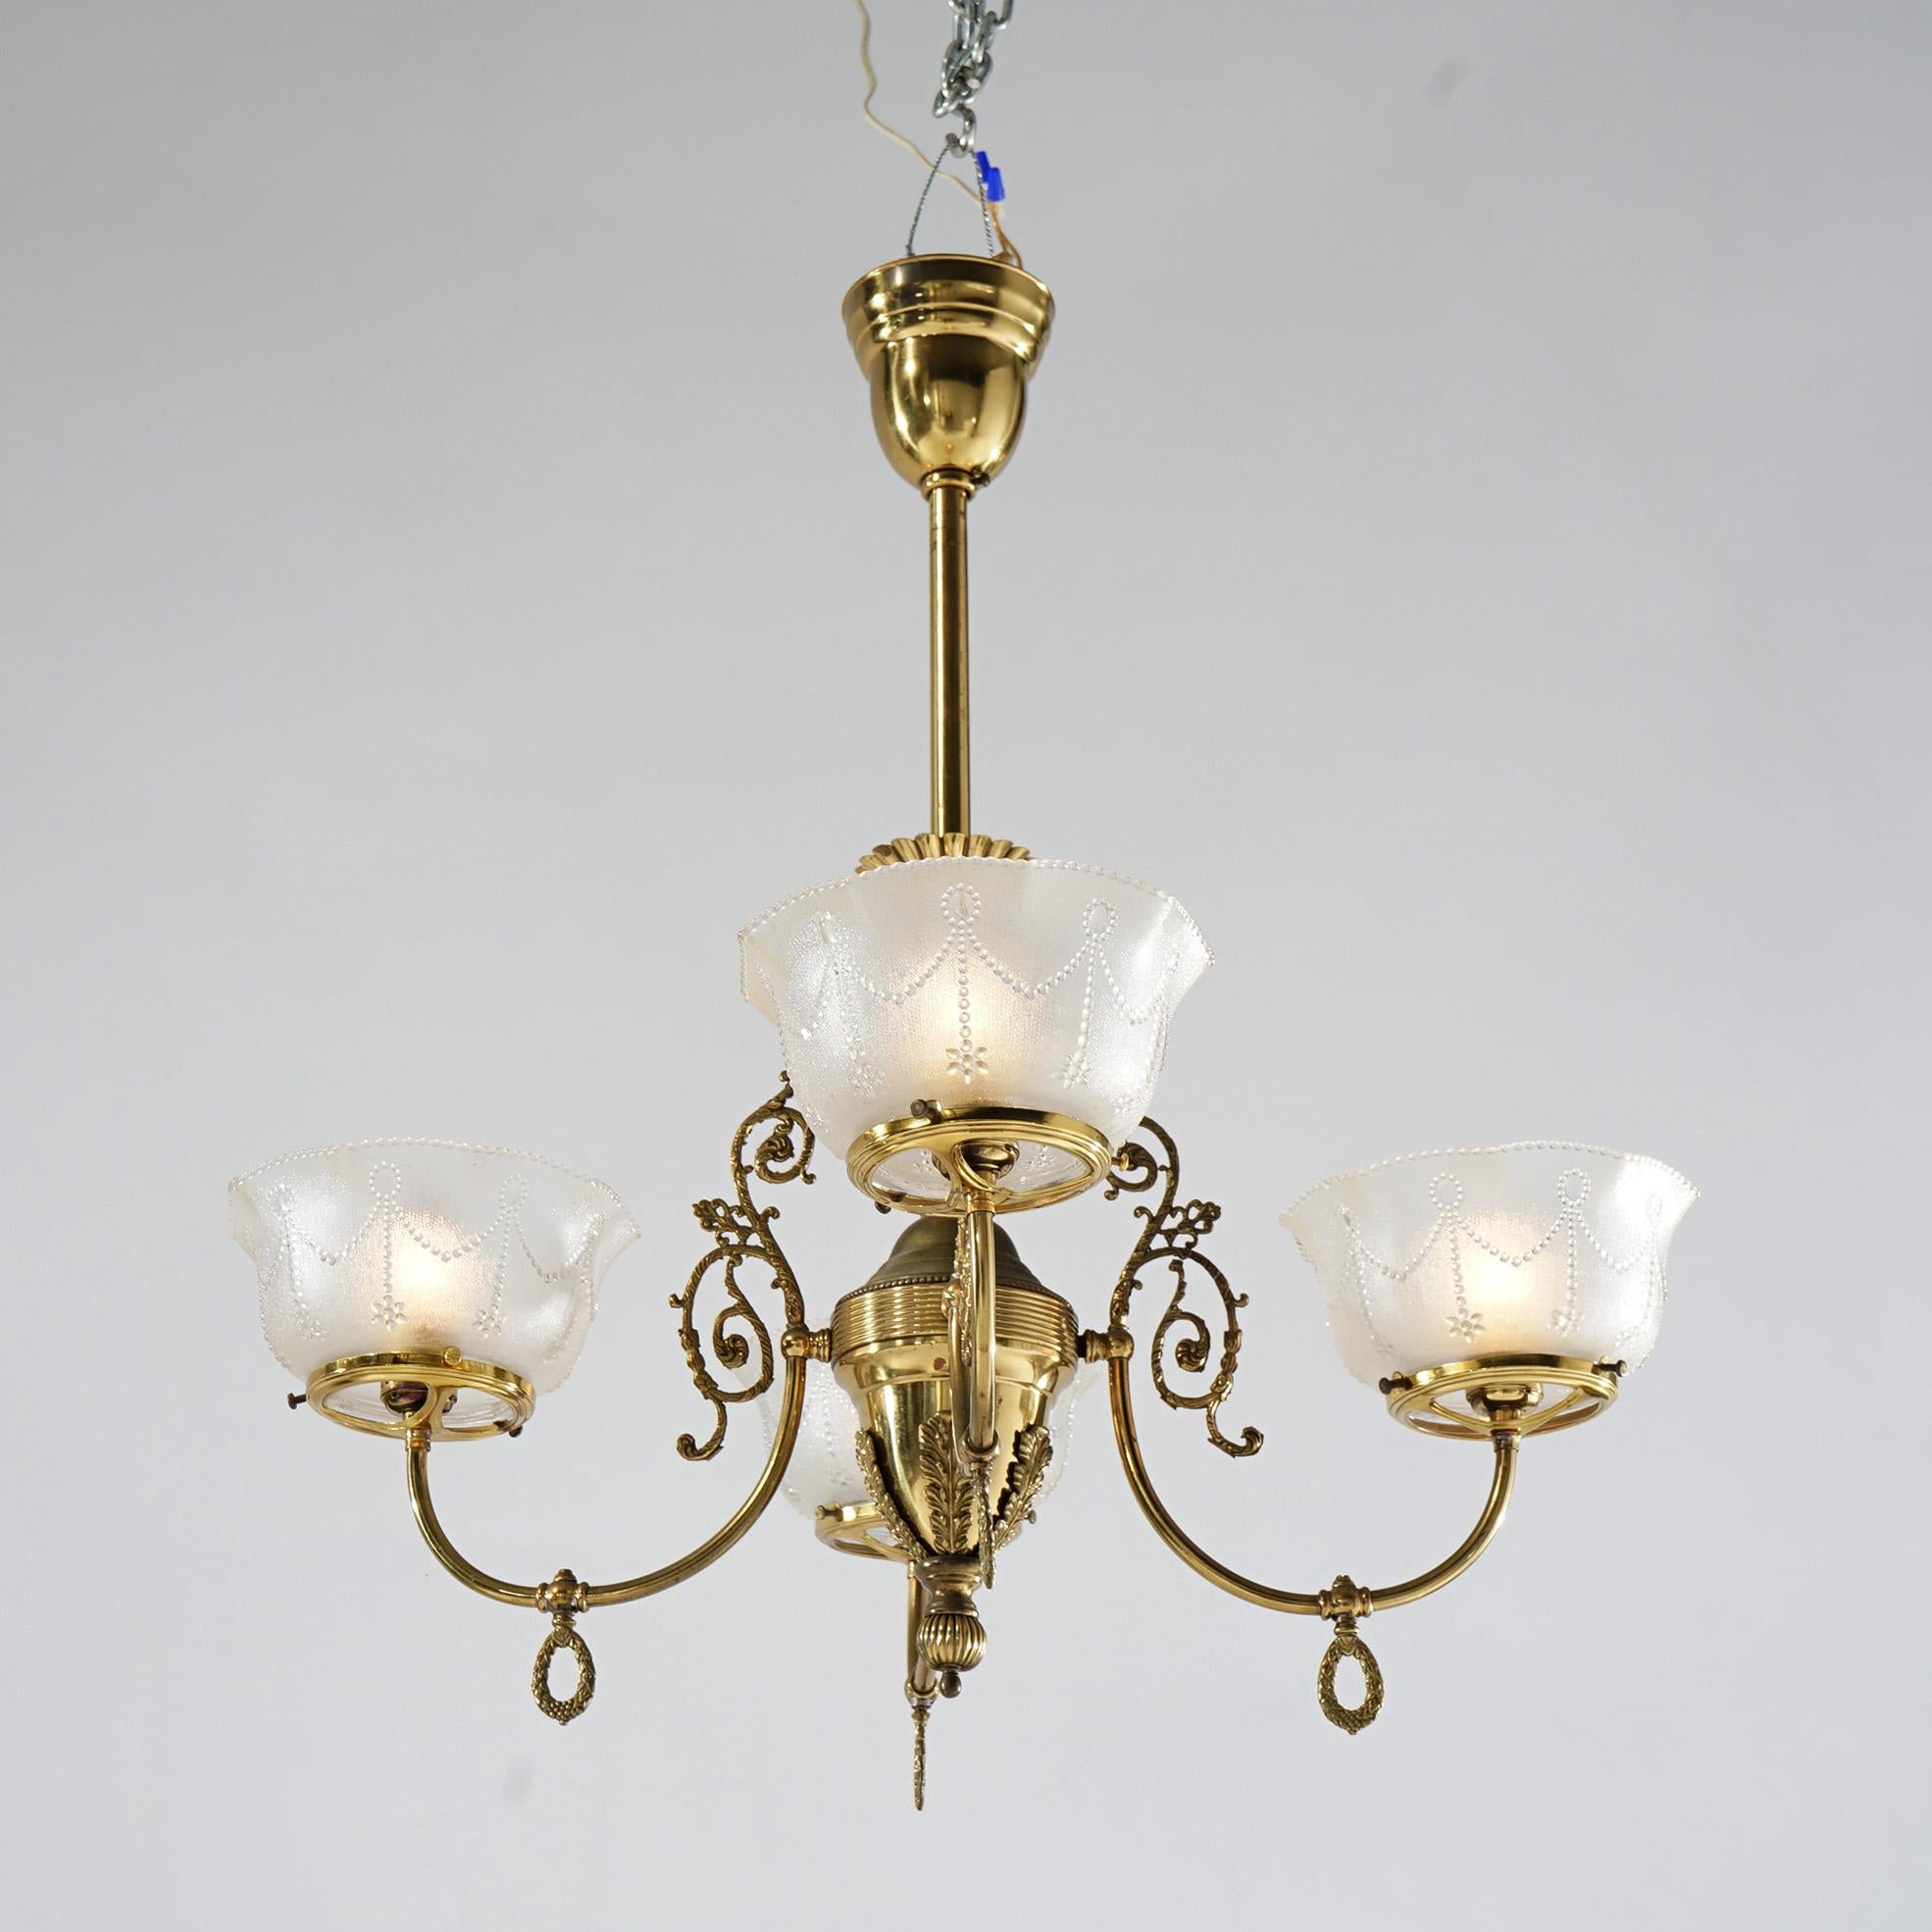 Antique Brass Four-Light Gas Hanging Fixture, Converted to Electric, 19th C 5